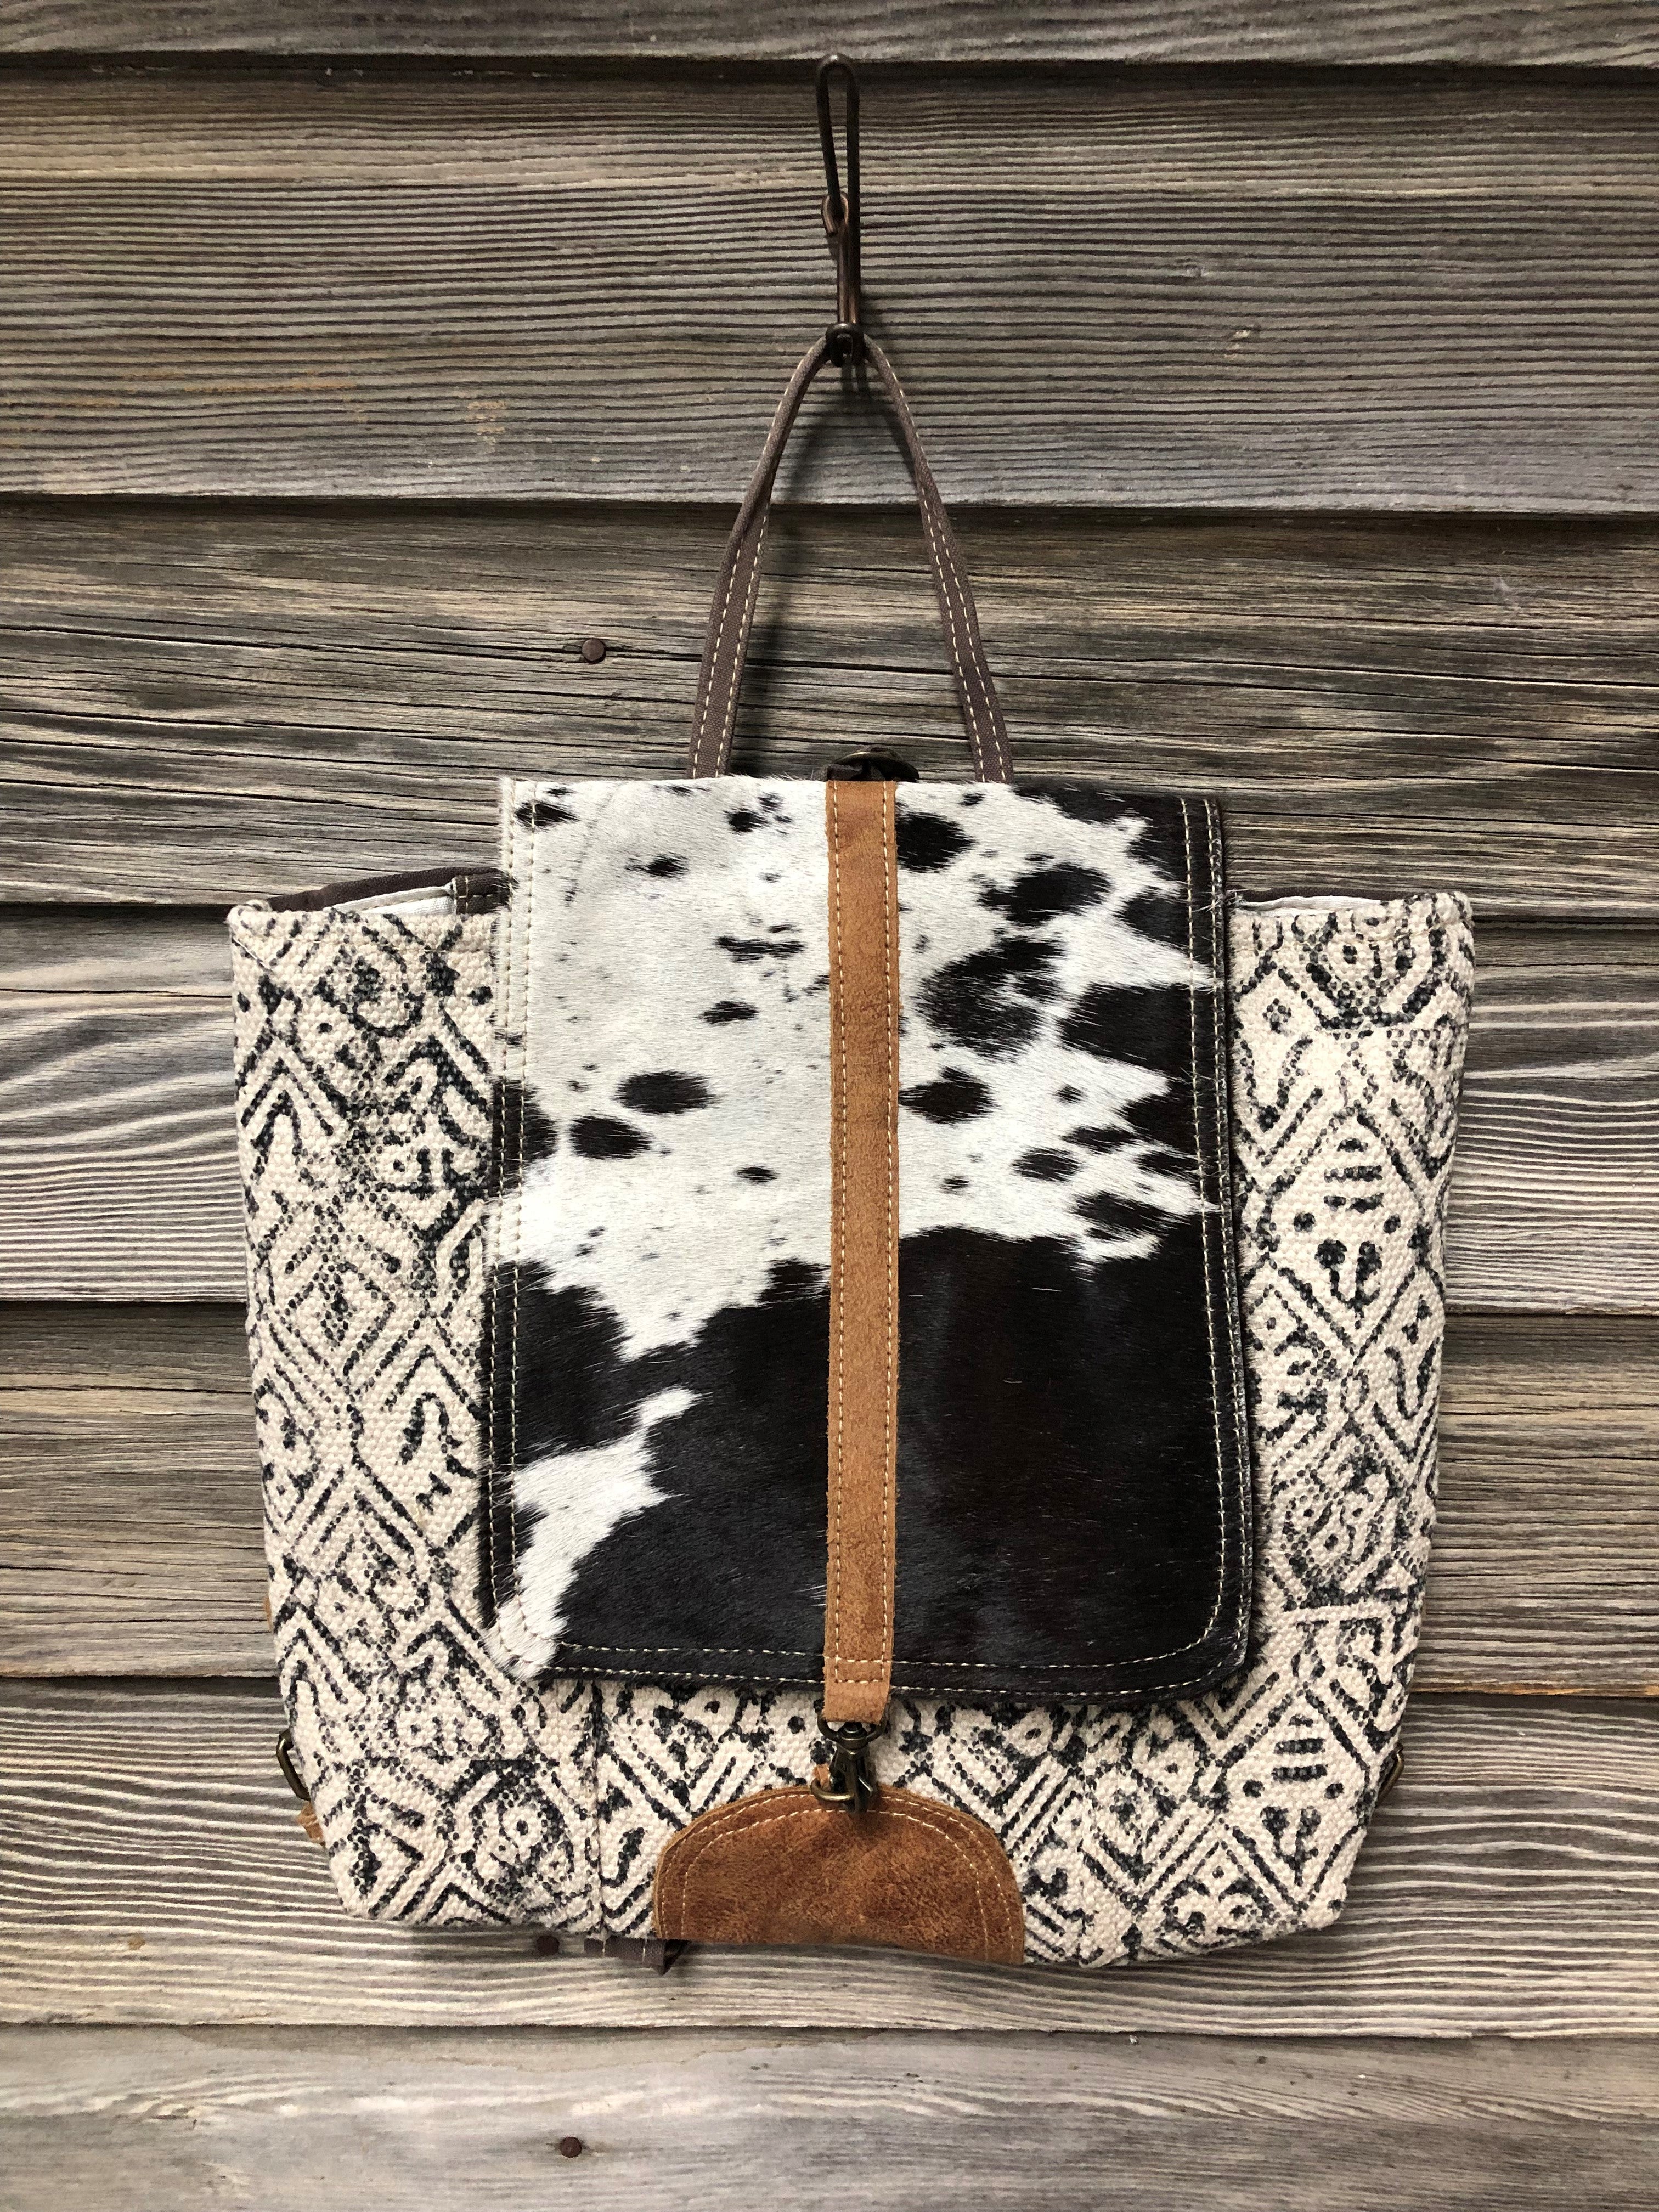 Cotton Rug and Cowhide Backpack